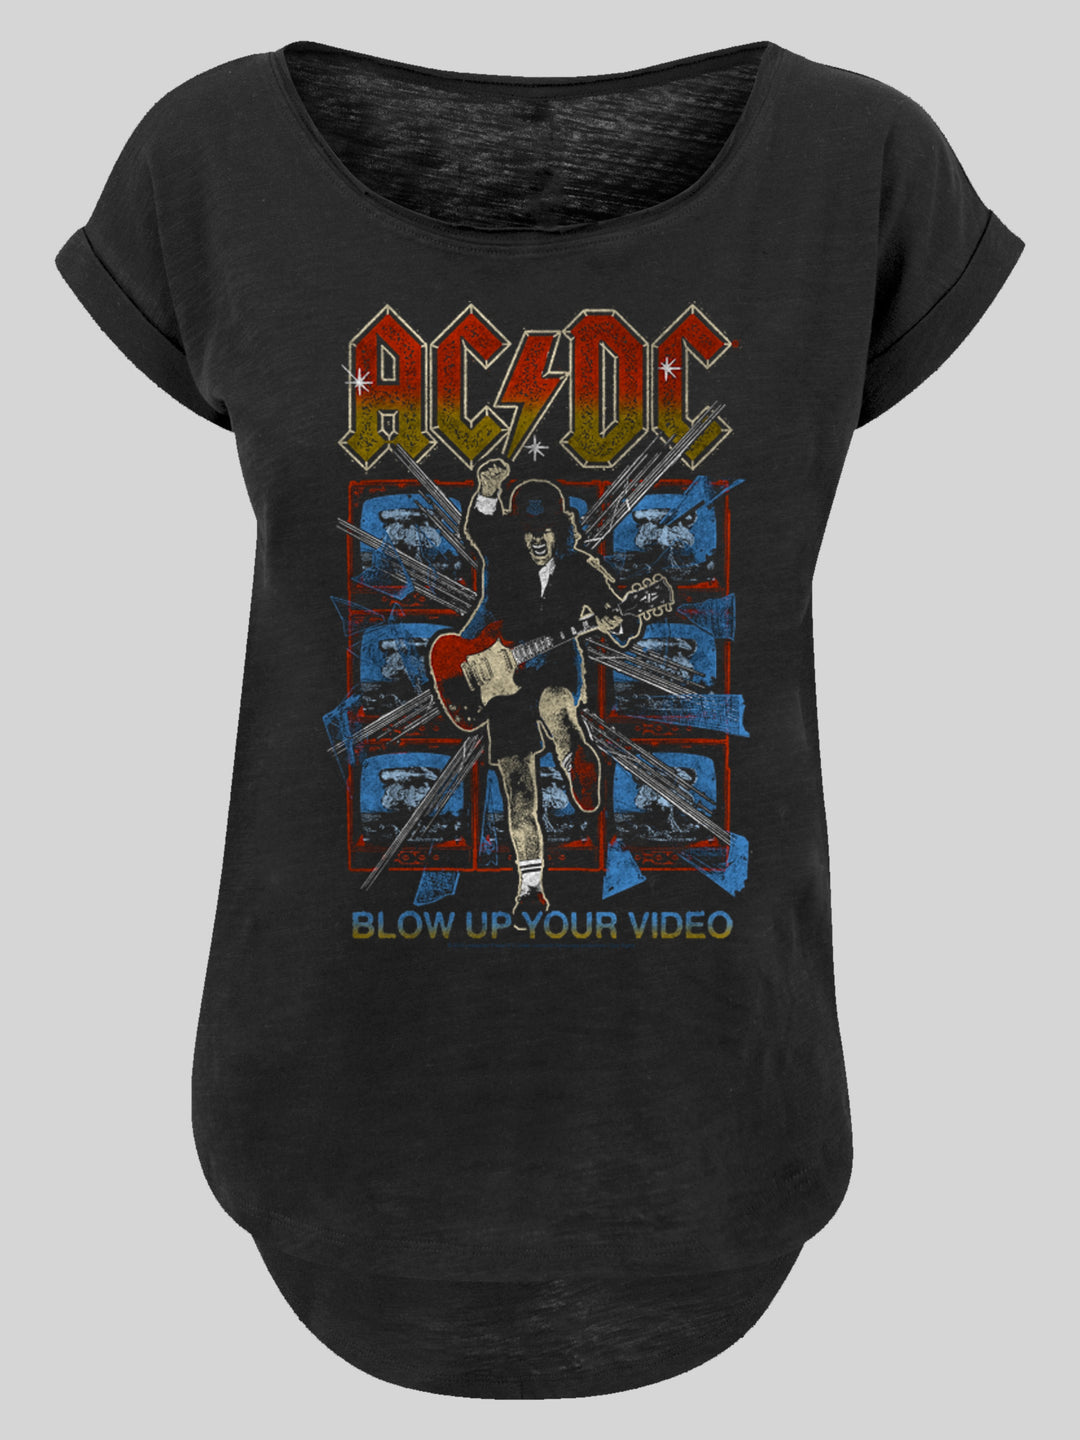 ACDC T-Shirt | Blow Up Your Video | Premium Long Ladies Tee